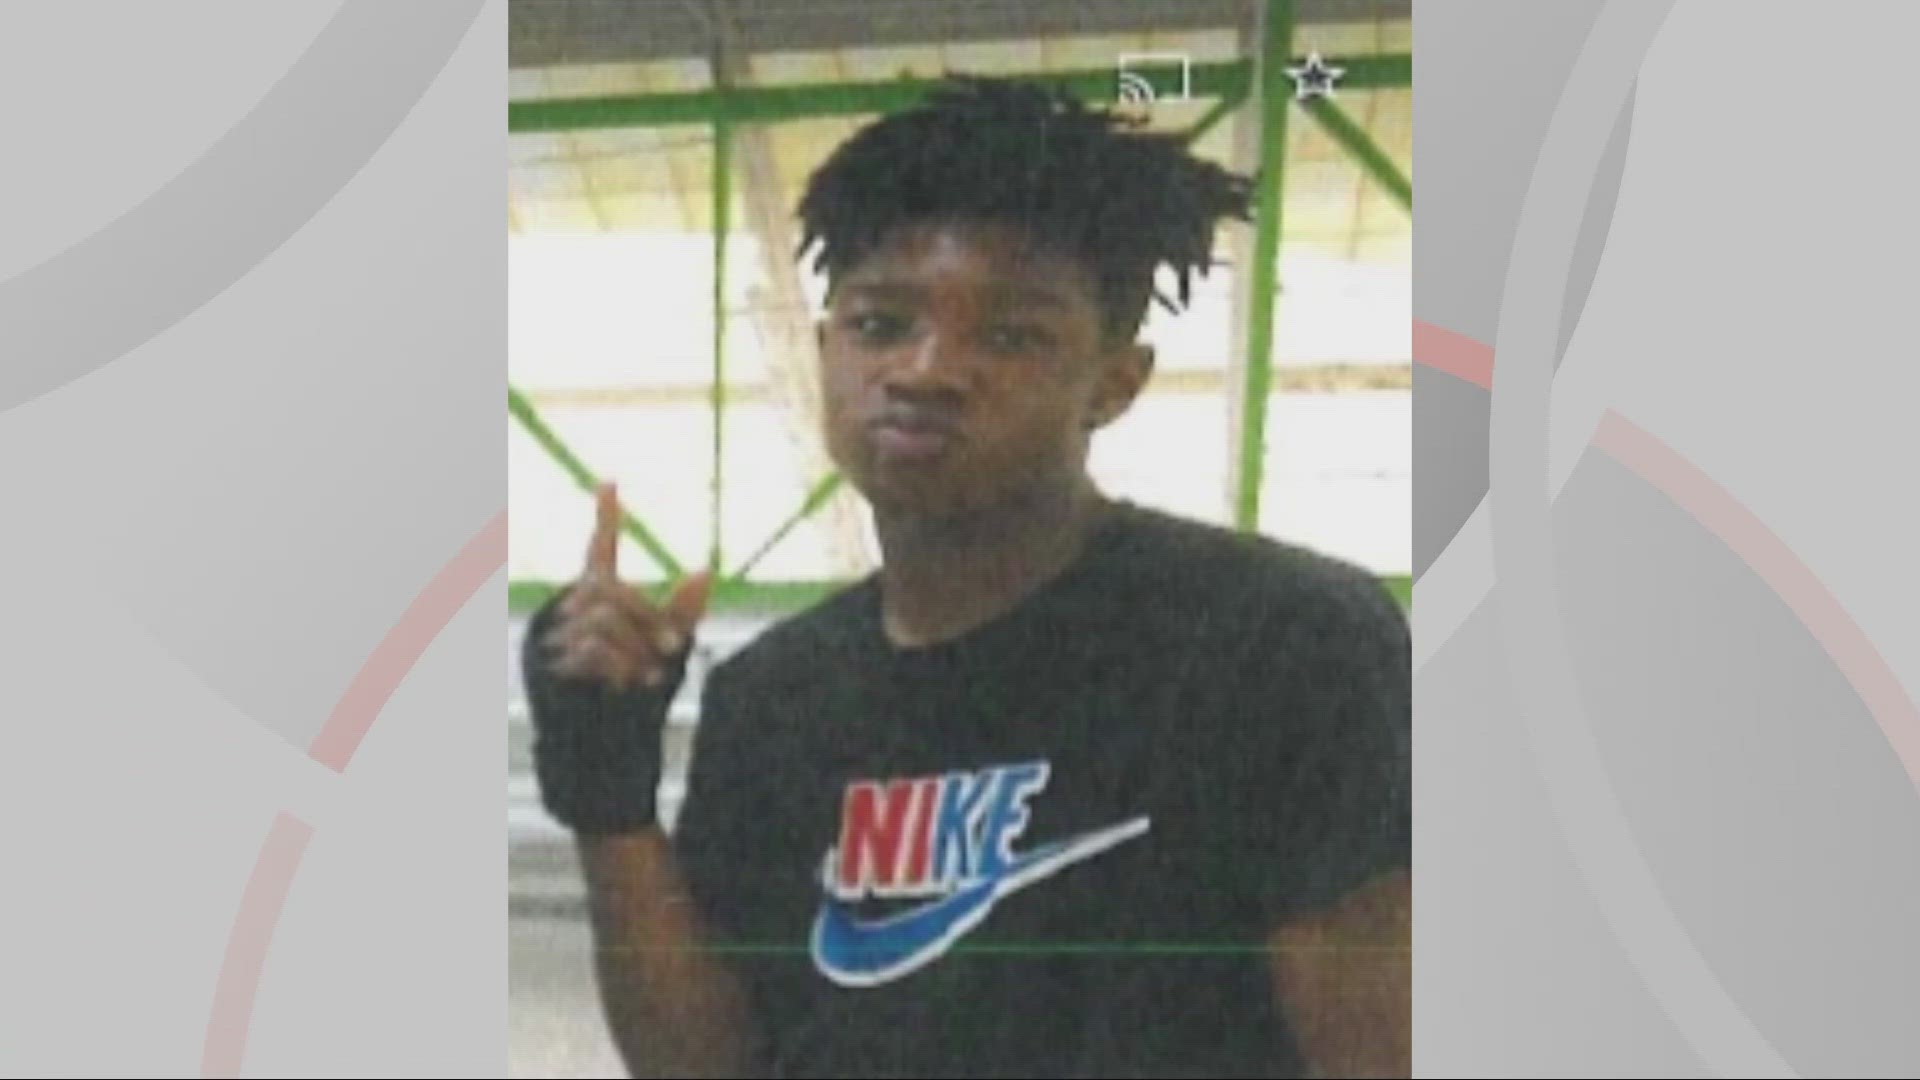 Police say the disappearance of Keshaun Williams is being investigated as a 'possible abduction.'